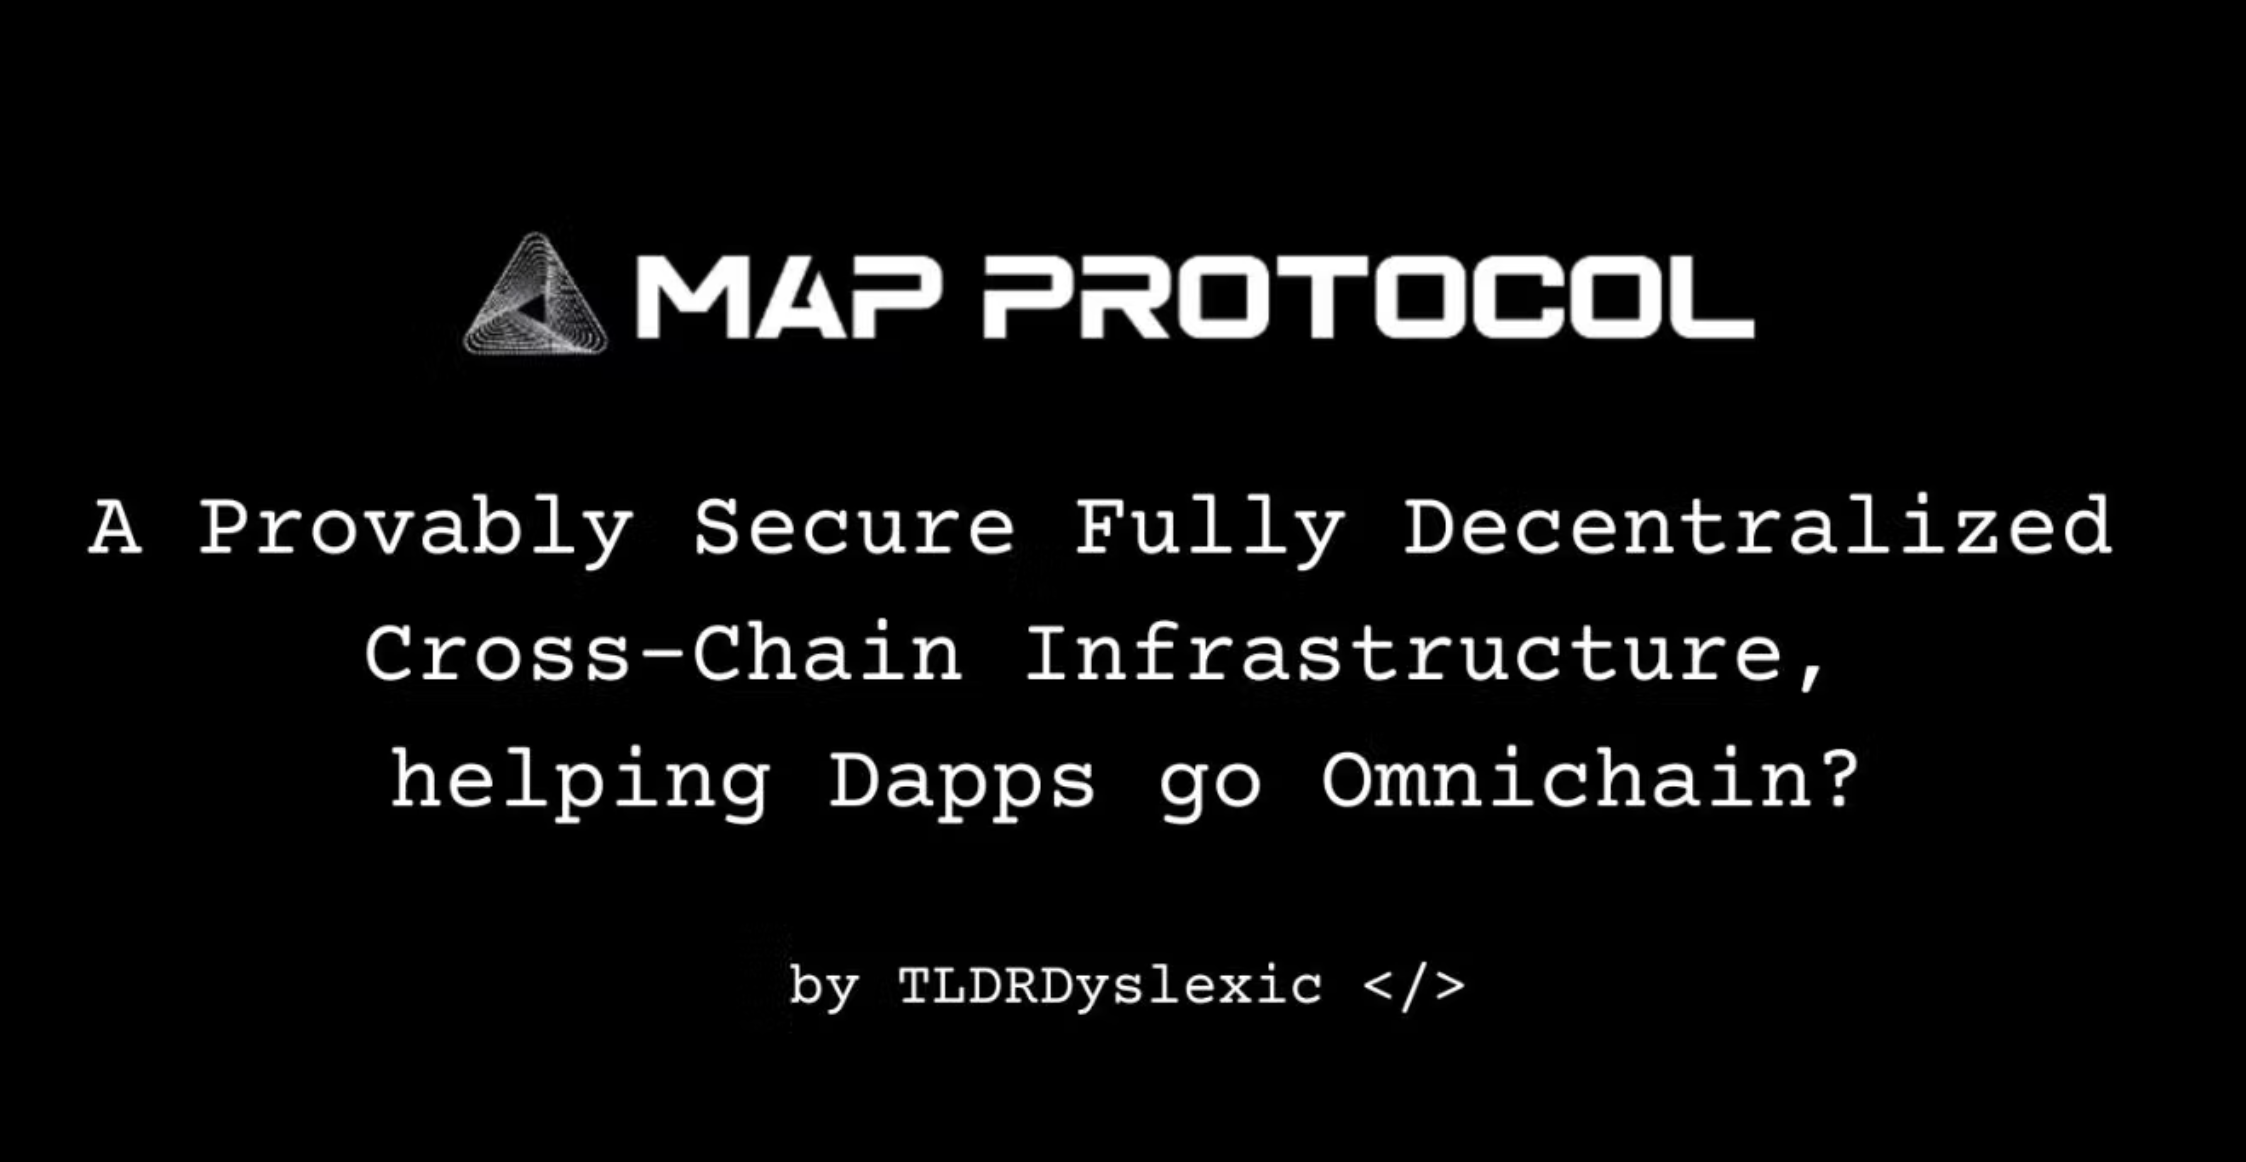 A provably secure and fully decentralized cross-chain infrastructure may bring dapps to omnichain